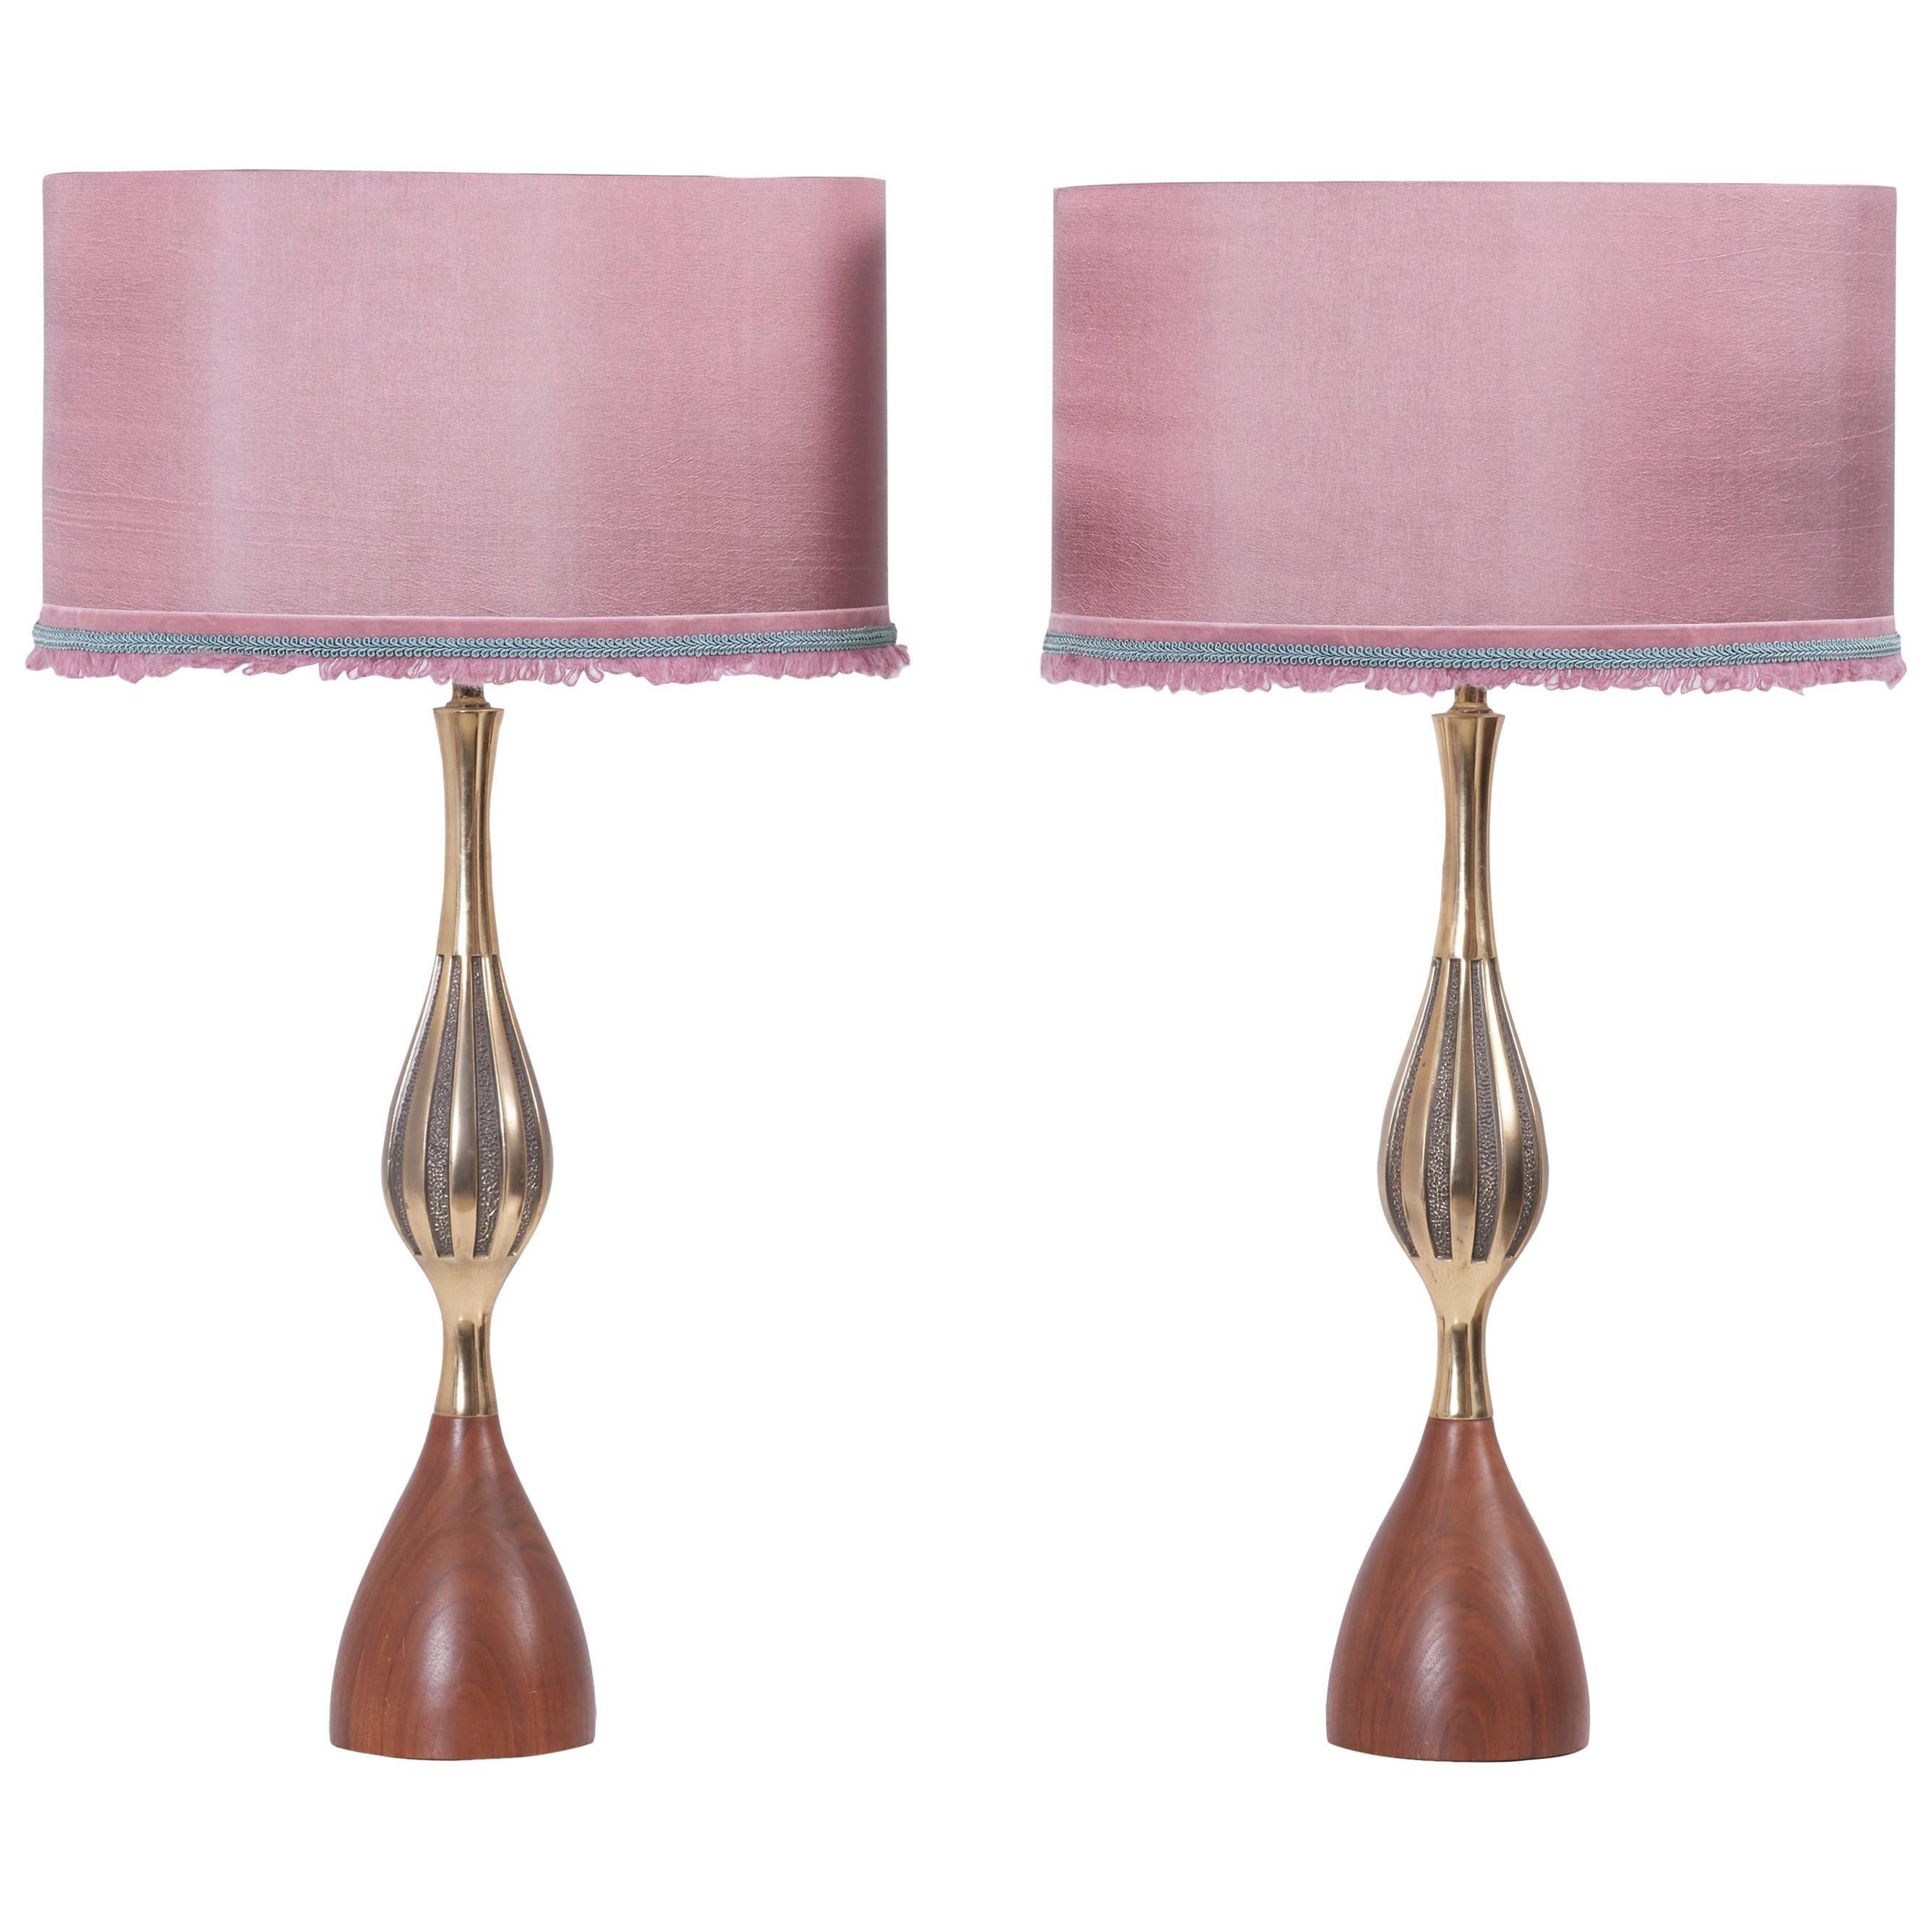 Pair of Table Lamps by Tony Paul for Westwood Lightning, USA, 1960s For Sale